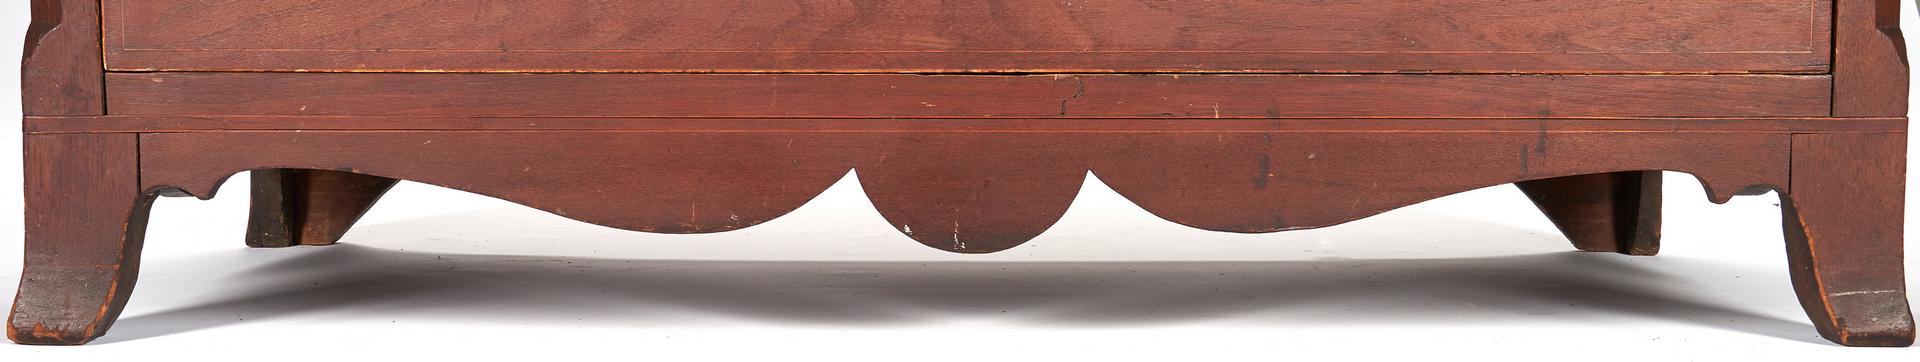 Federal Inlaid Hepplewhite Chest of Drawers - Image 9 of 28